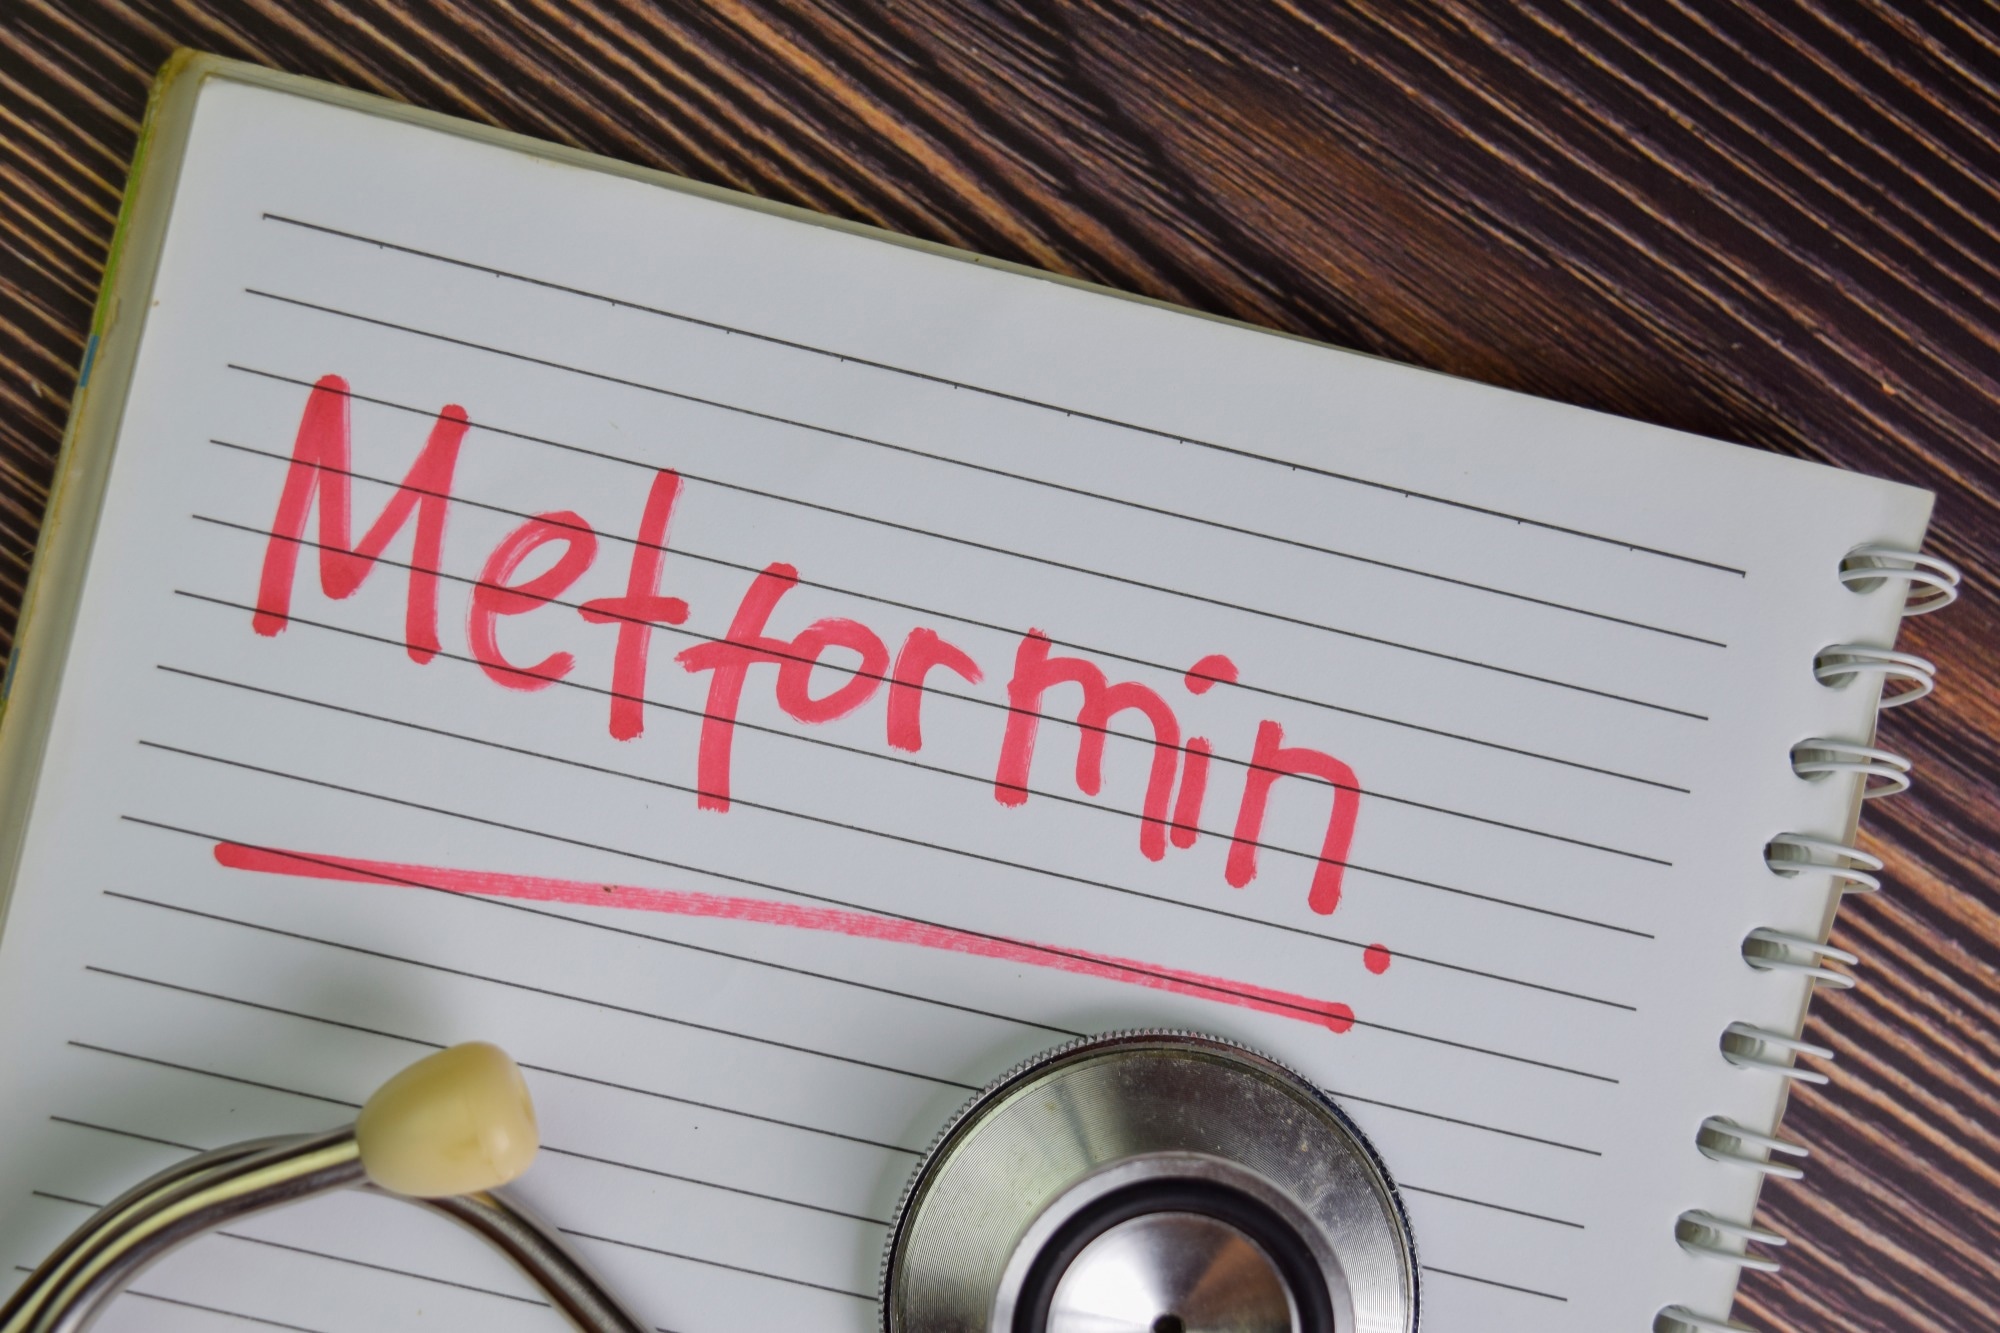 Study: Metformin is Associated with Reduced COVID-19 Severity in Patients with Prediabetes. Image Credit: bangoland/Shutterstock